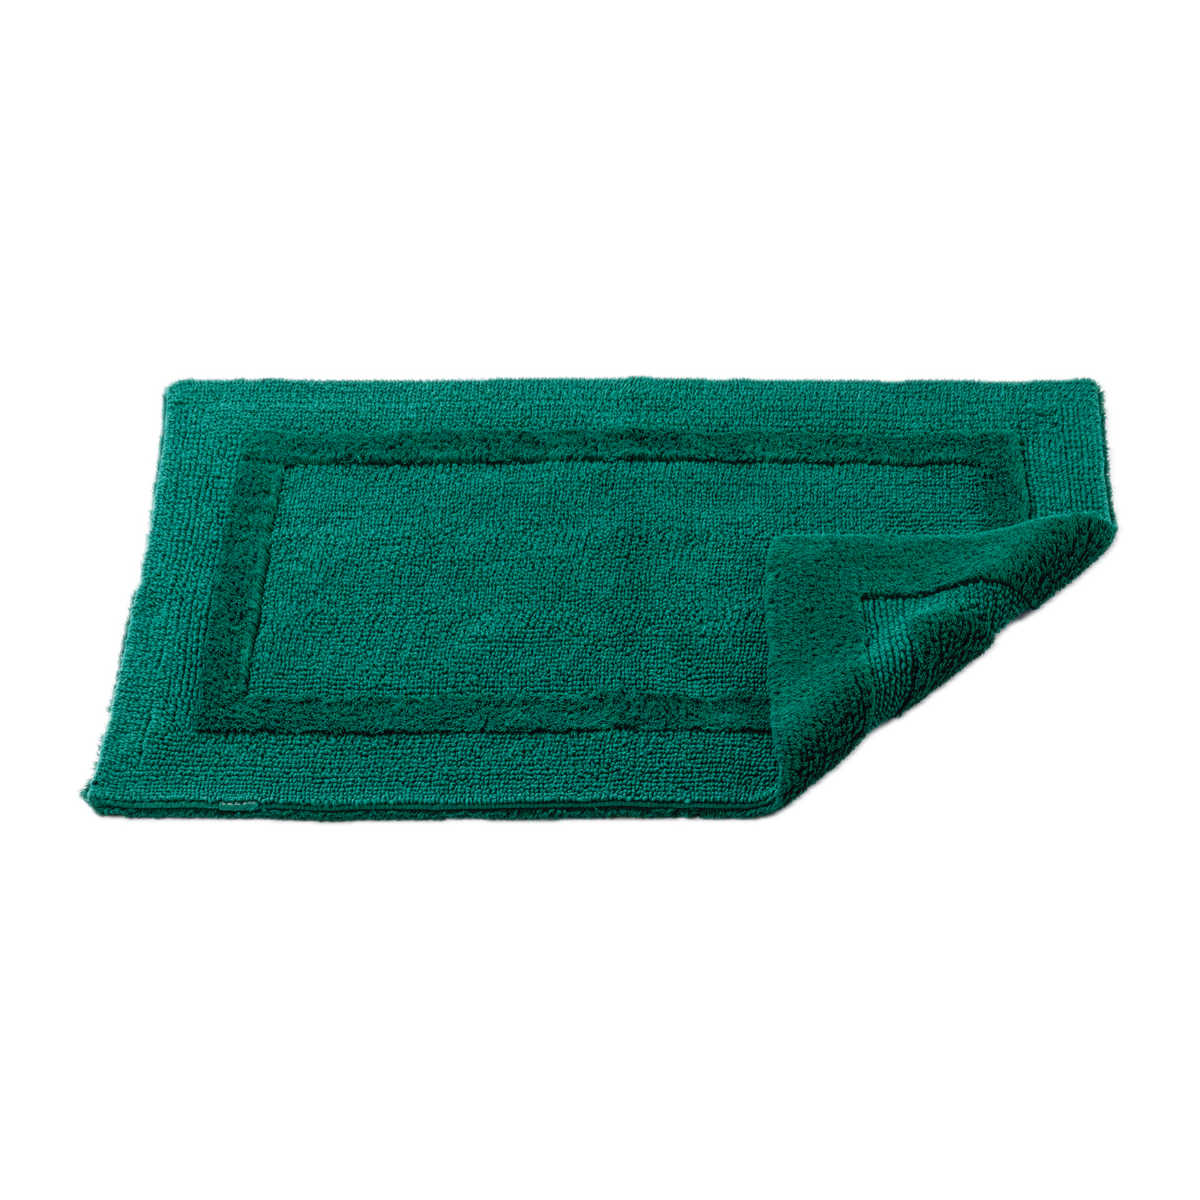 Abyss Habidecor Reversible Bath Rug in British Green Color with Corner Fold